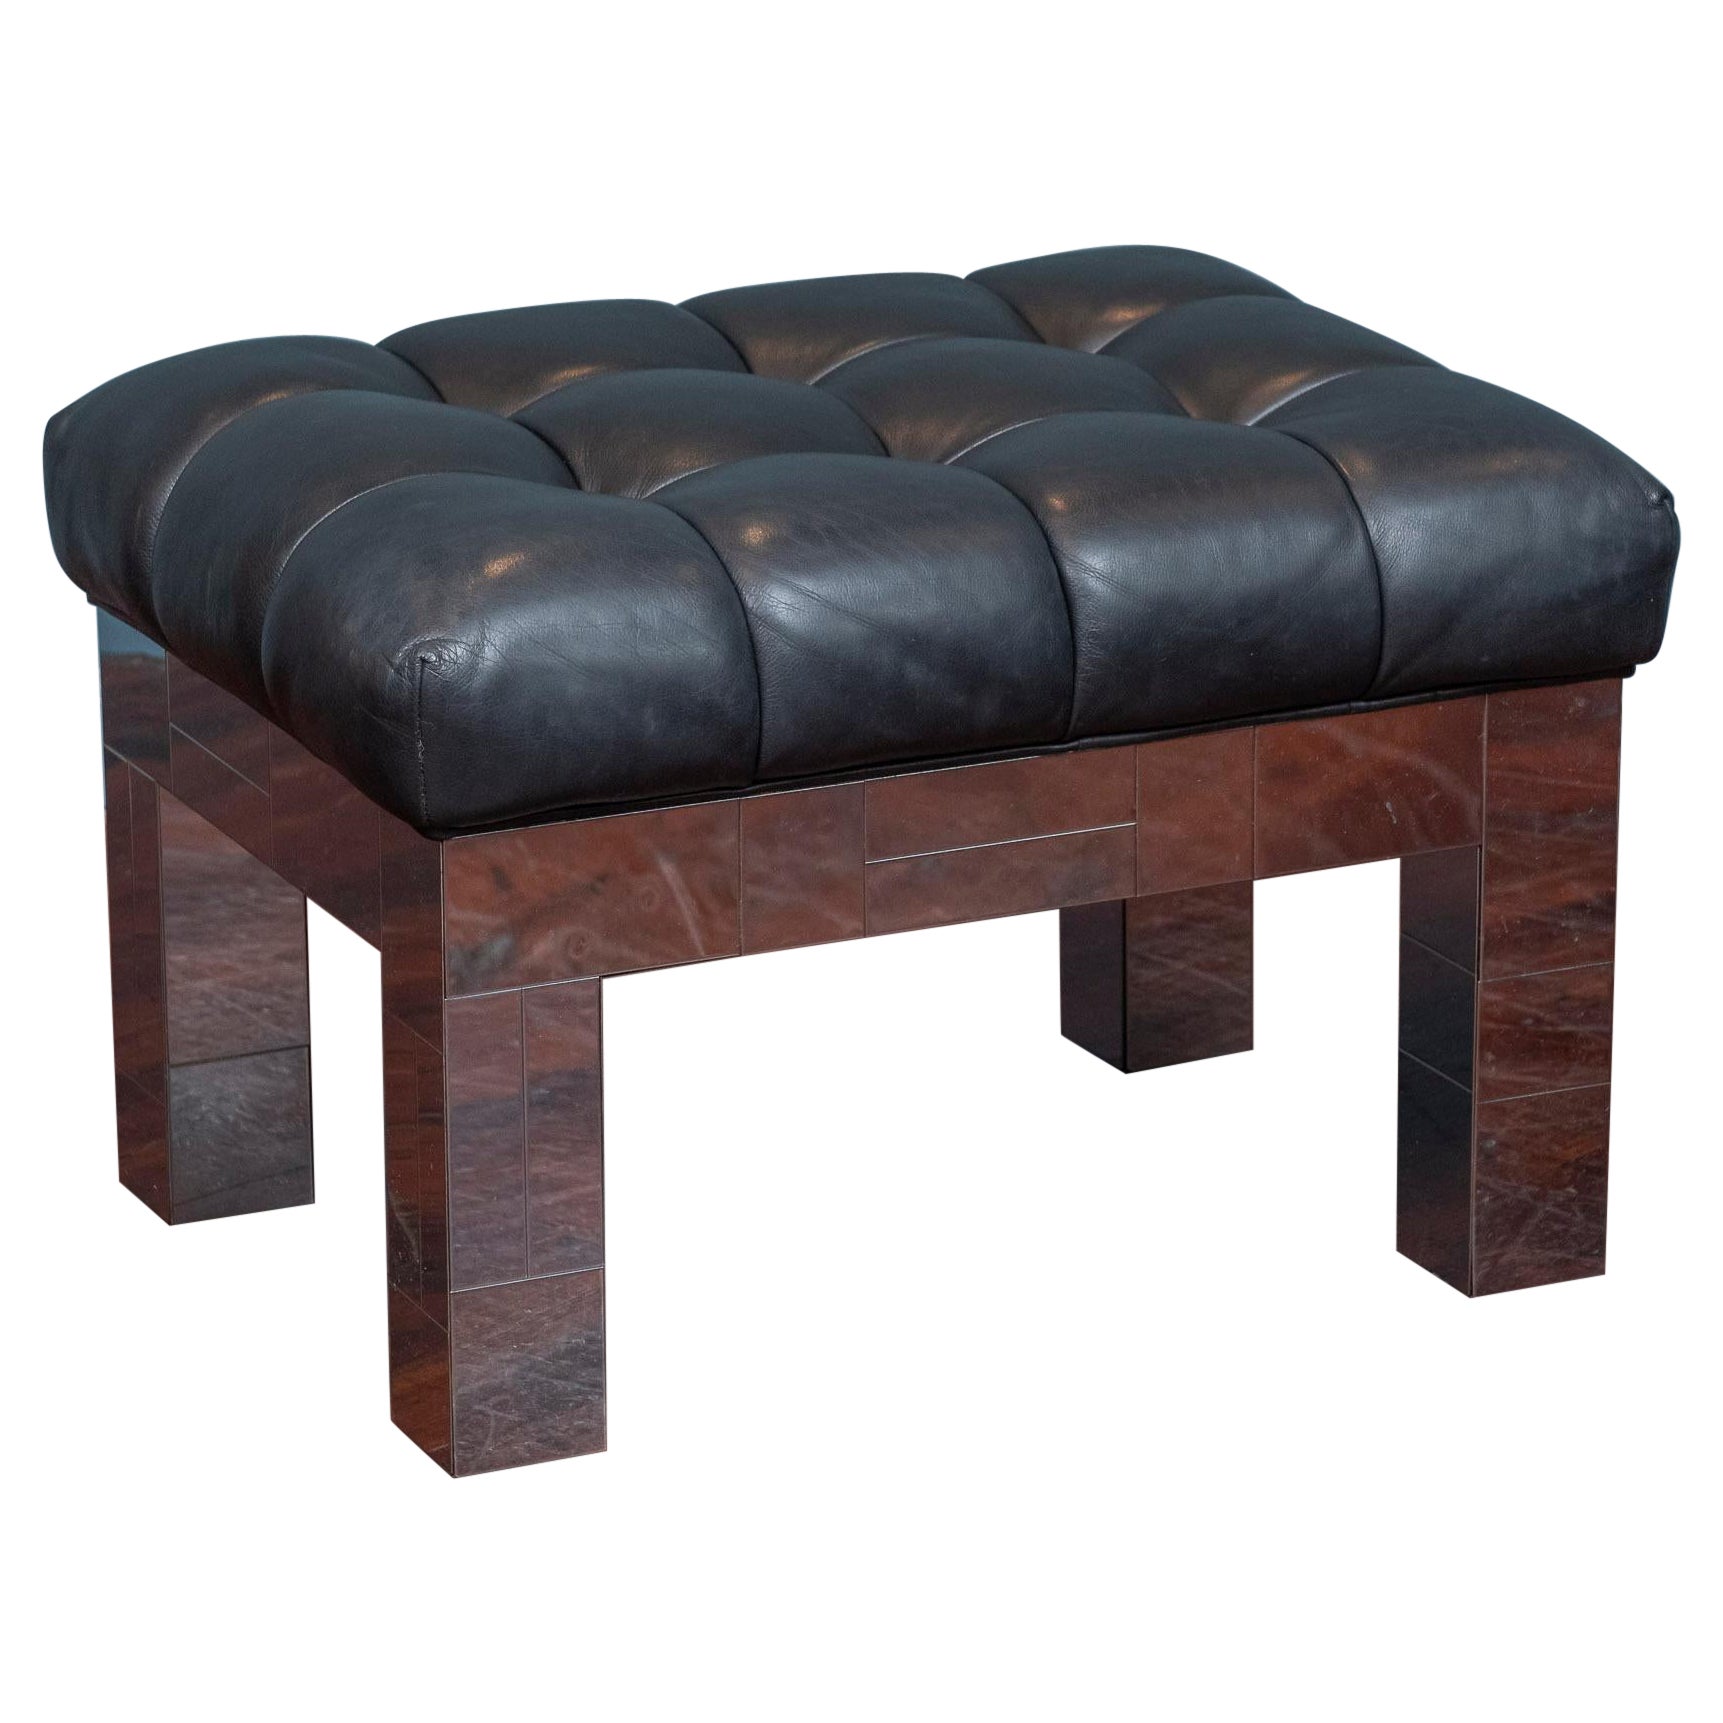 Paul Evans Cityscape Stool or Bench For Sale